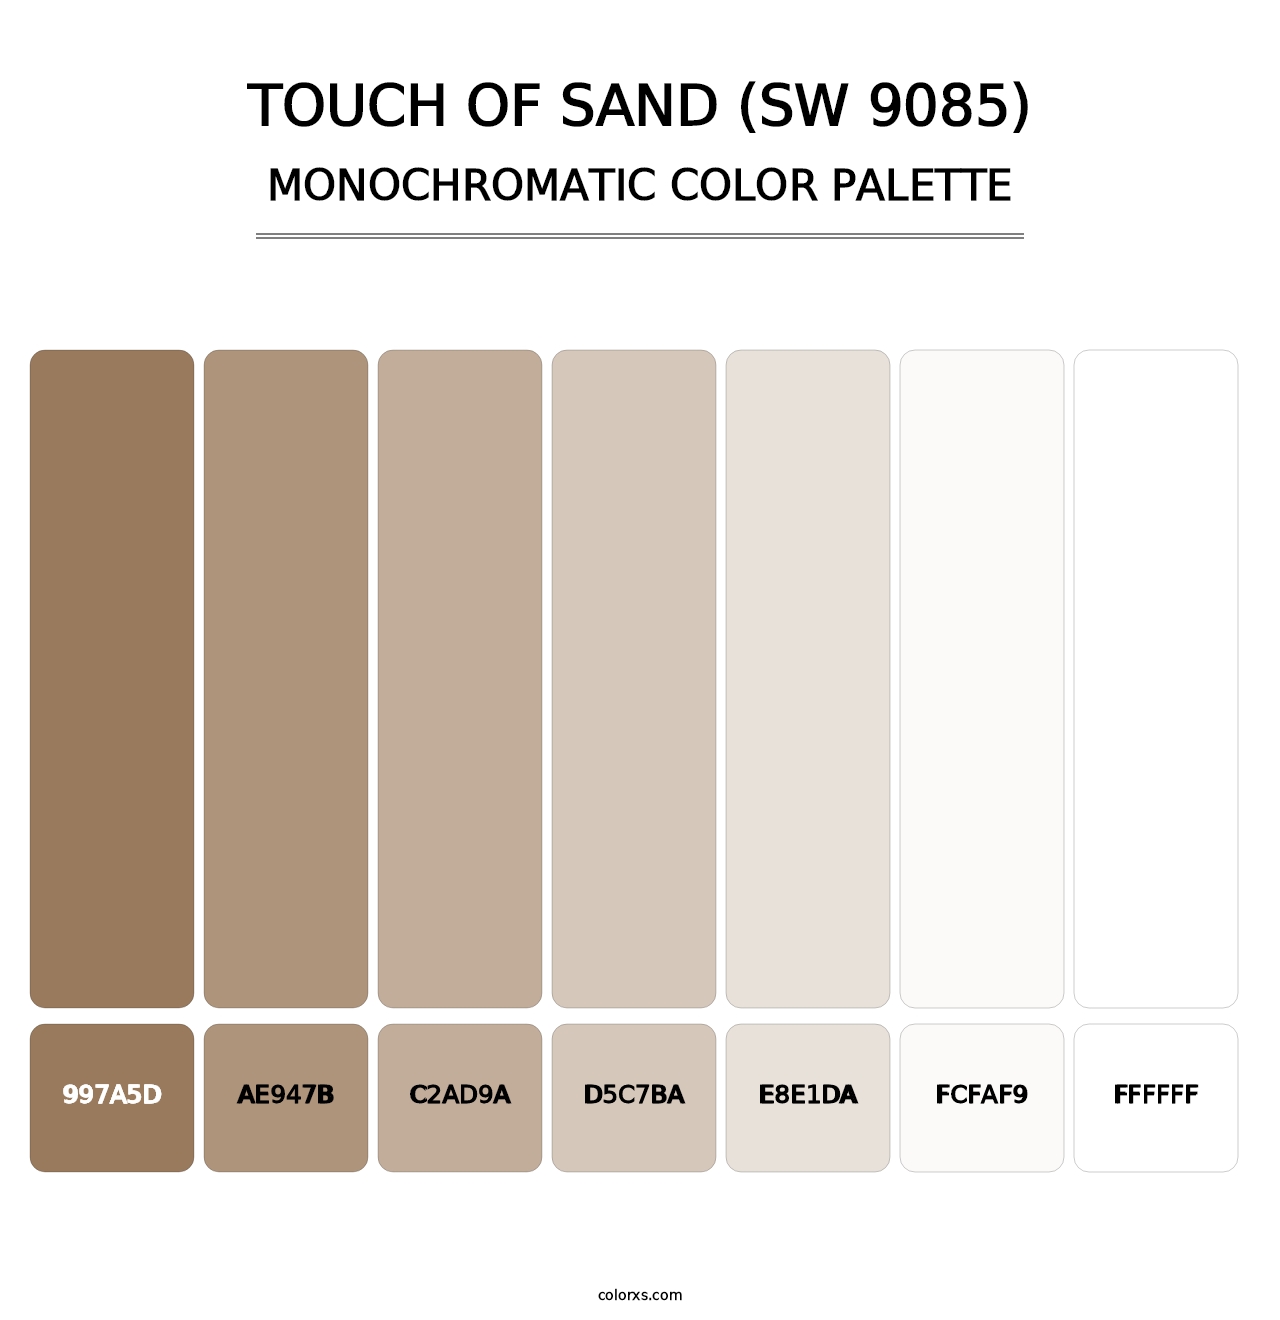 Touch of Sand (SW 9085) - Monochromatic Color Palette